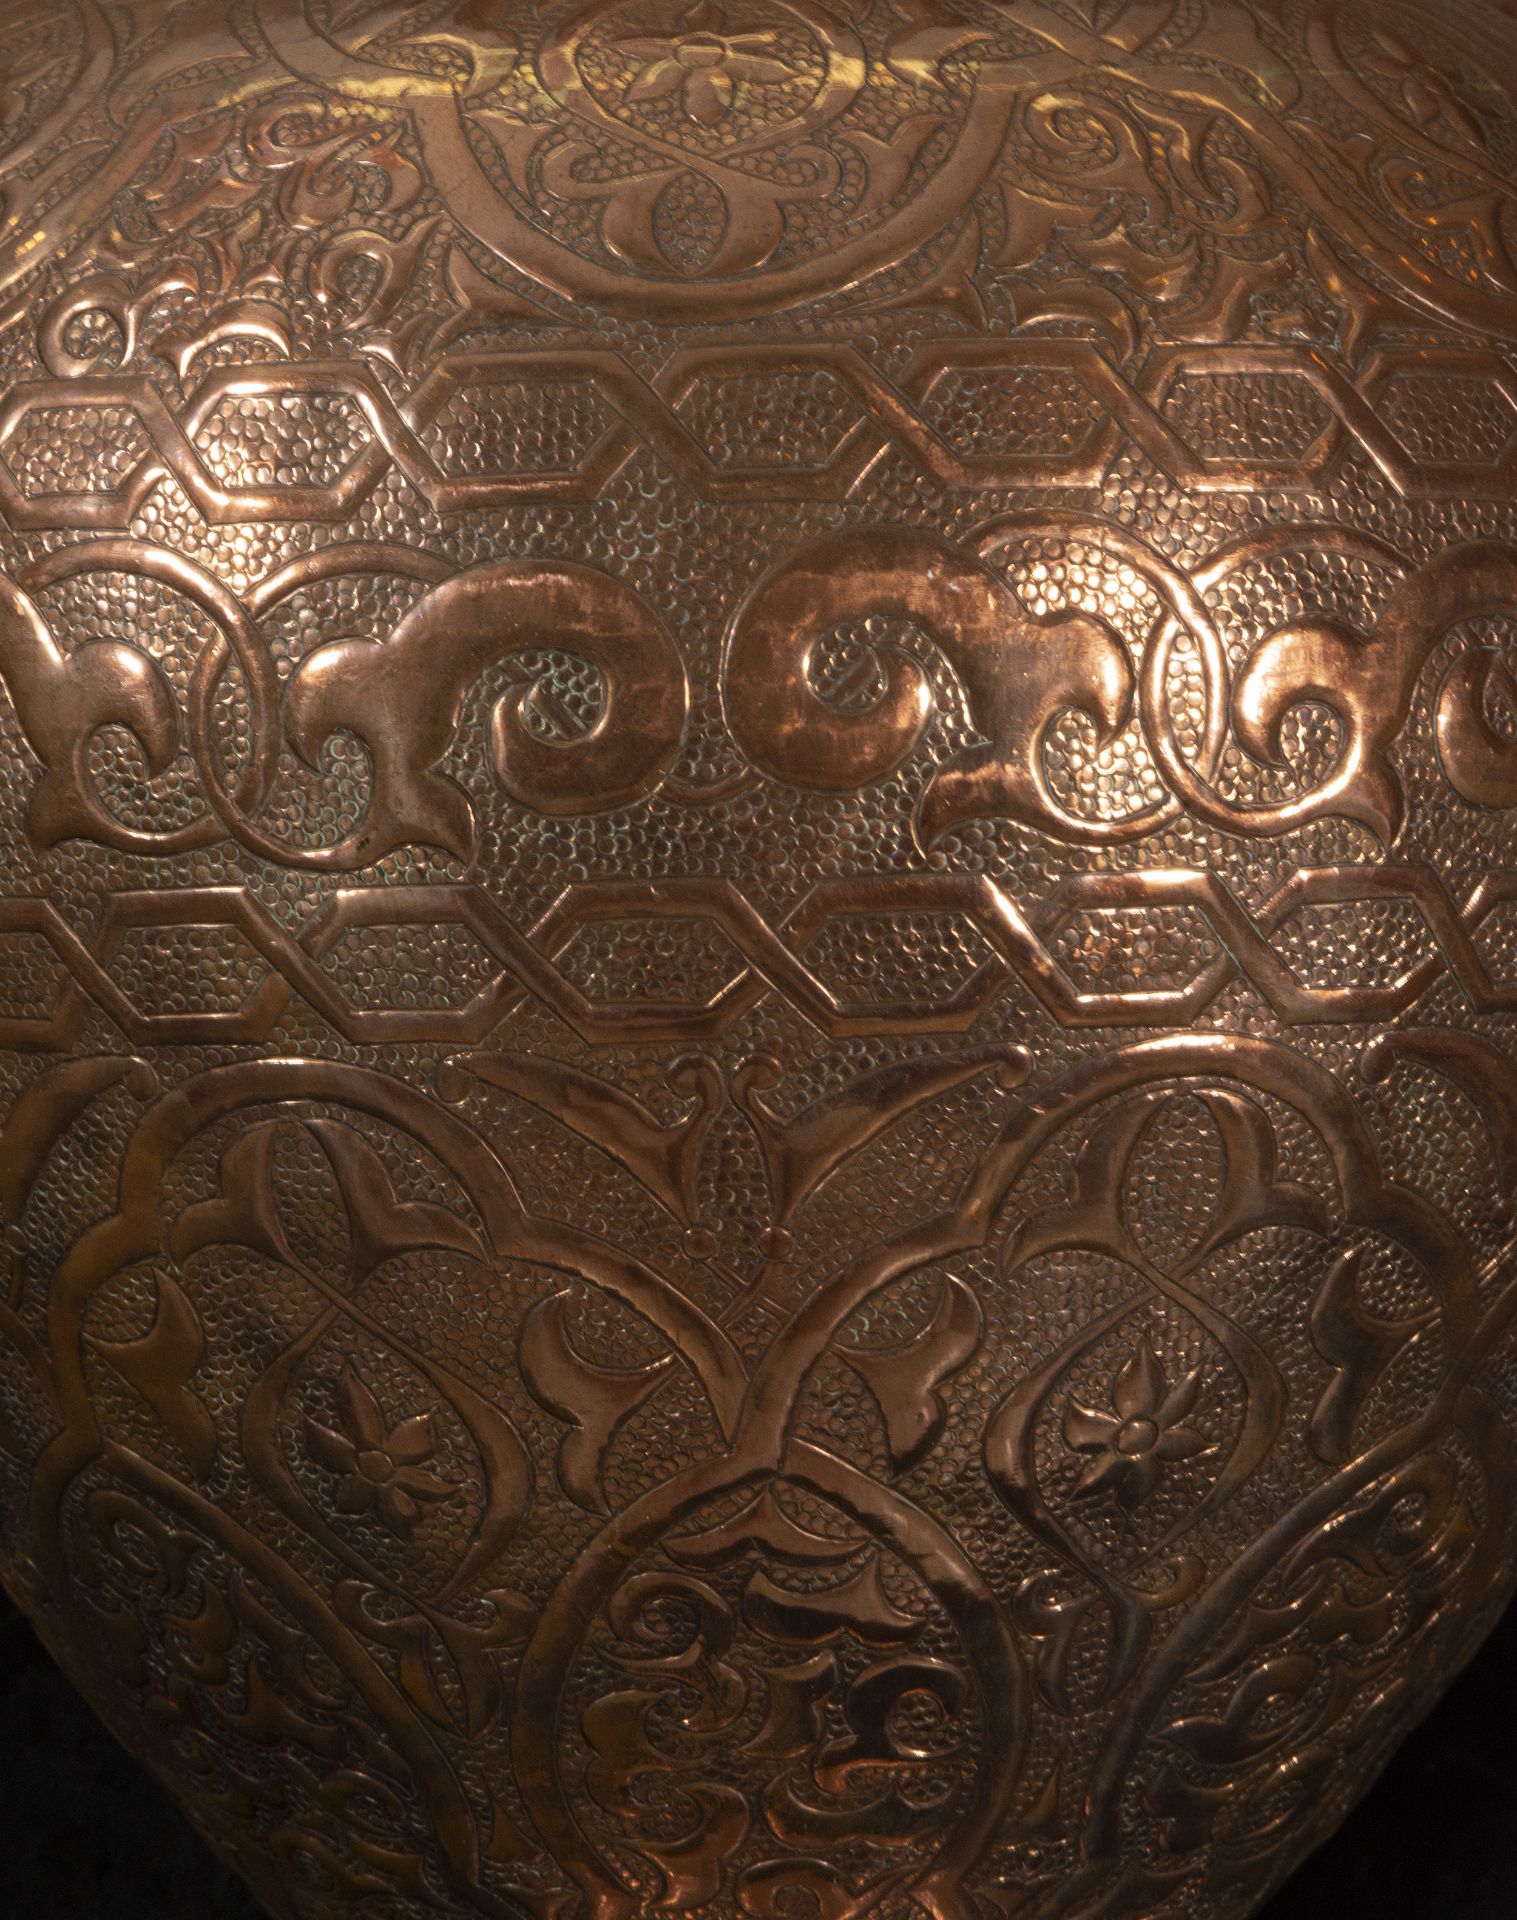 Pair of Large Embossed Copper Vases in the "Alhambra" style, Andalusian Granada work from the 19th c - Bild 5 aus 10